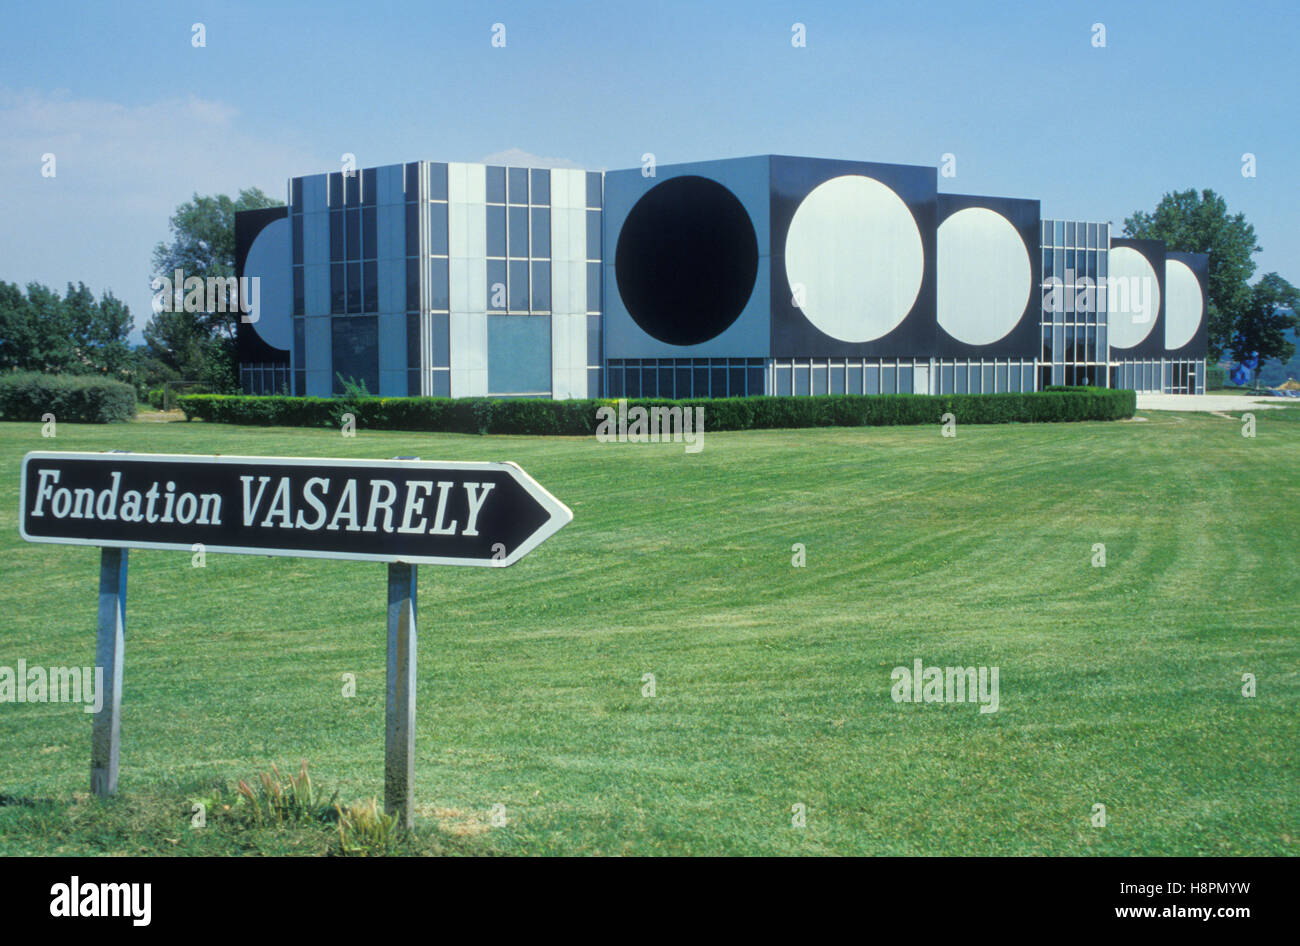 Fondation Vasarely, Victor Vasarely, art museum, Aix-en-Provence, Provence, France, Europe Stock Photo